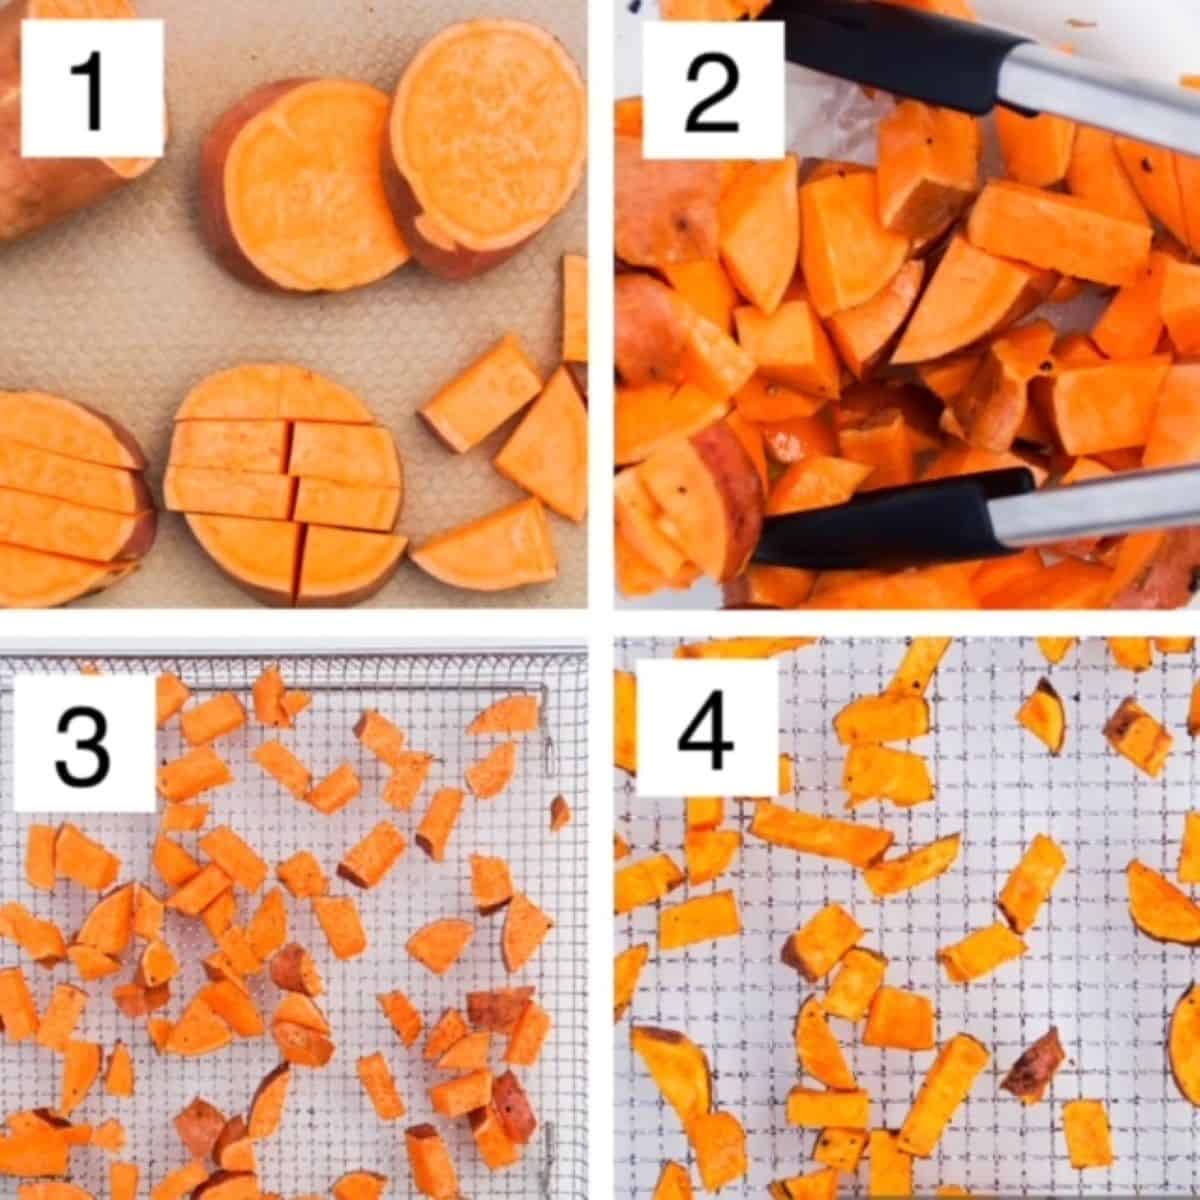 Four process shots showing sliced sweet potatoes, sweet potato chunks in a bowl, and sweet potato chunks on an air fryer basket.